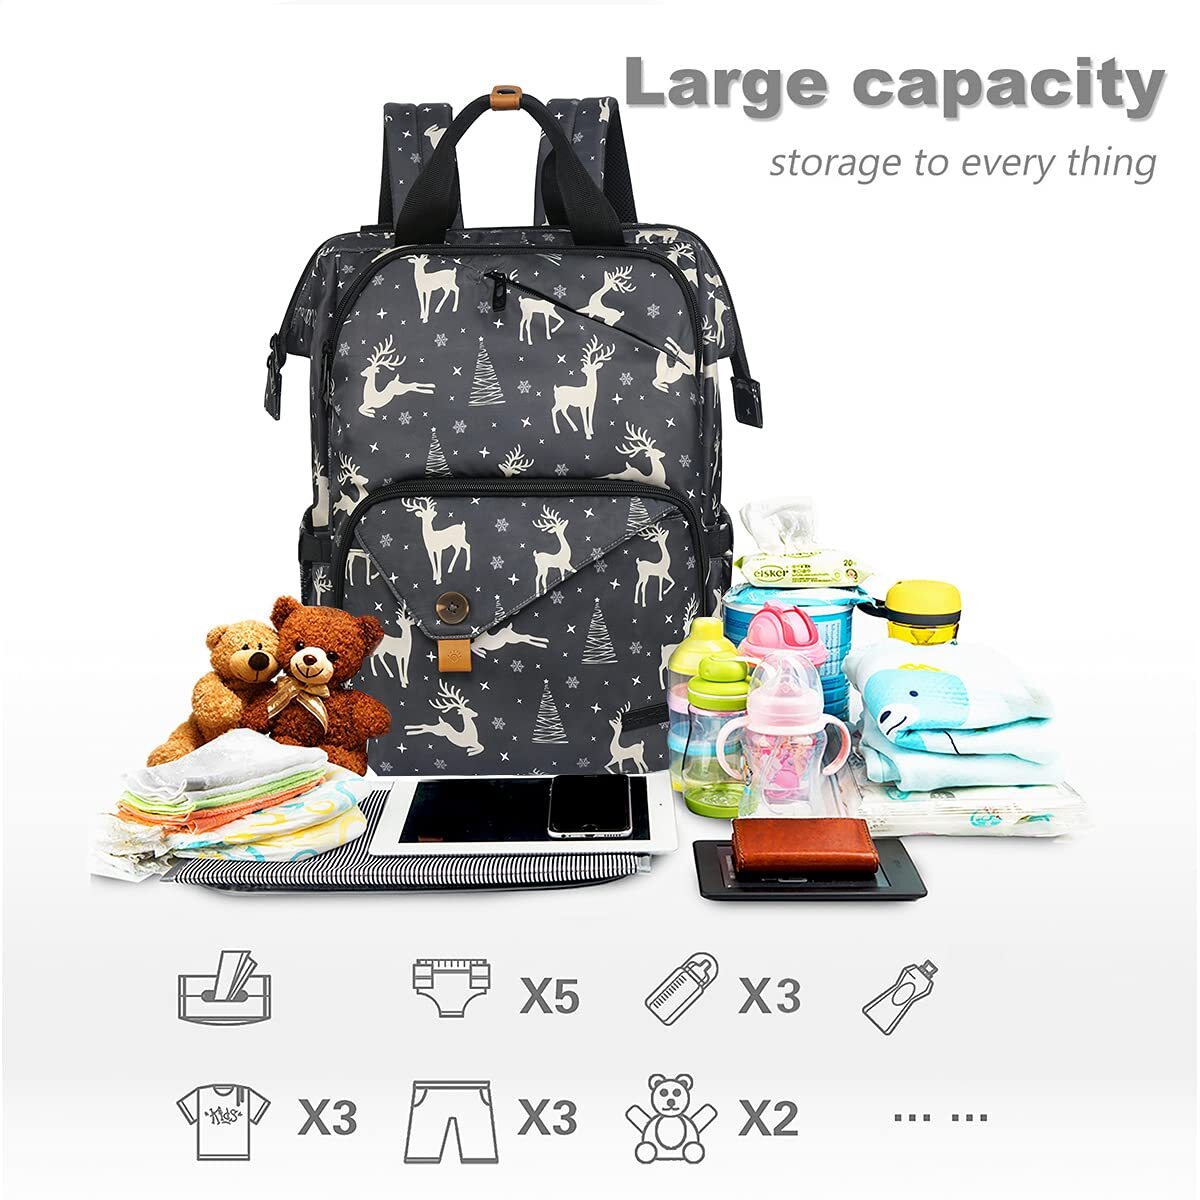 Best Hap Tim Lunch Box Insulated Lunch Bag Large Cooler Tote Bag (16040-G)  at shop diaper backpack, lunch box, laptop backpack, picnic backpack,  cooler bag and baby car seat cover